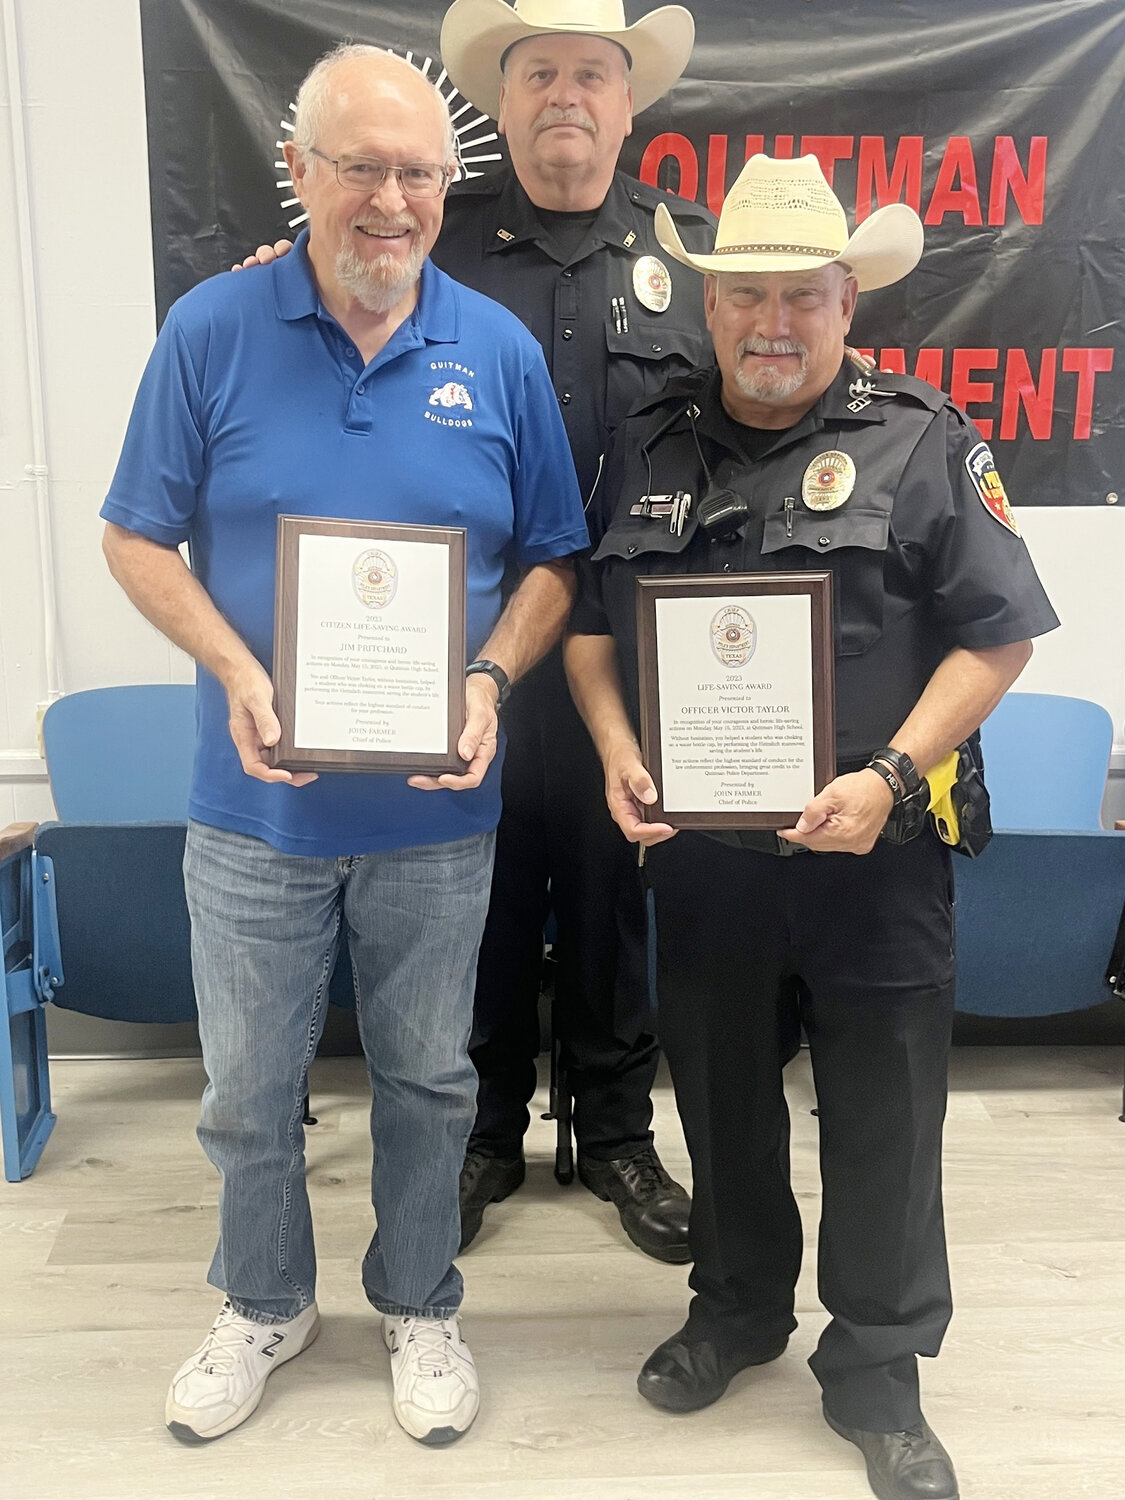 Quitman Police Department Life-Saving Award winners were given plaques by Chief John Farmer last Thursday afternoon. They are Jim Pritchard (left) and Officer Victor Taylor (right).